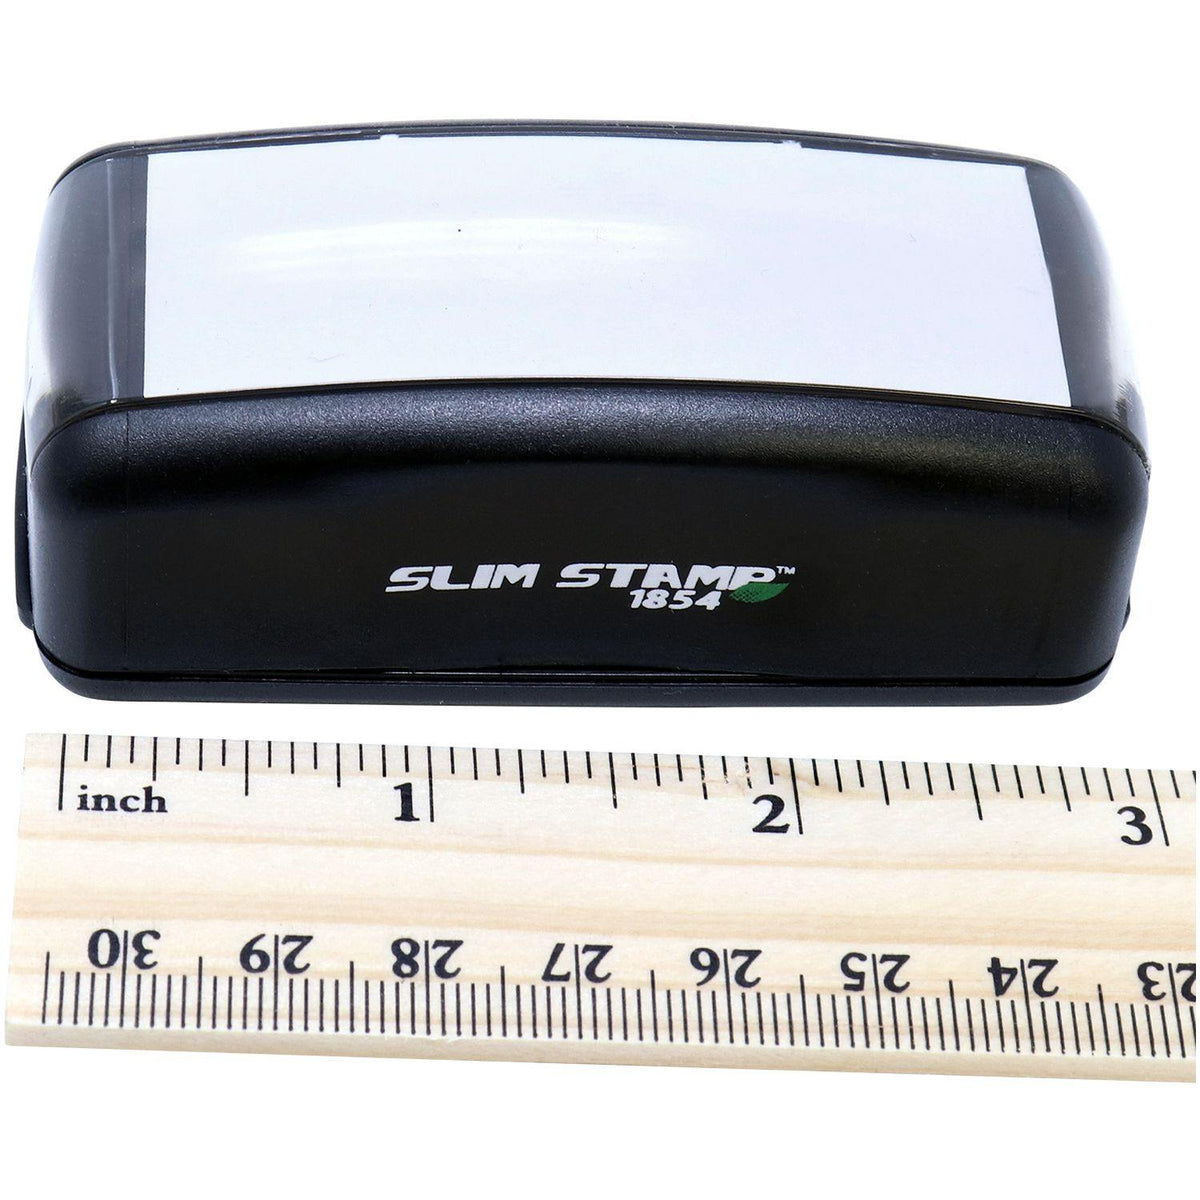 Measurement Large Pre-Inked nCov Stamp with Ruler